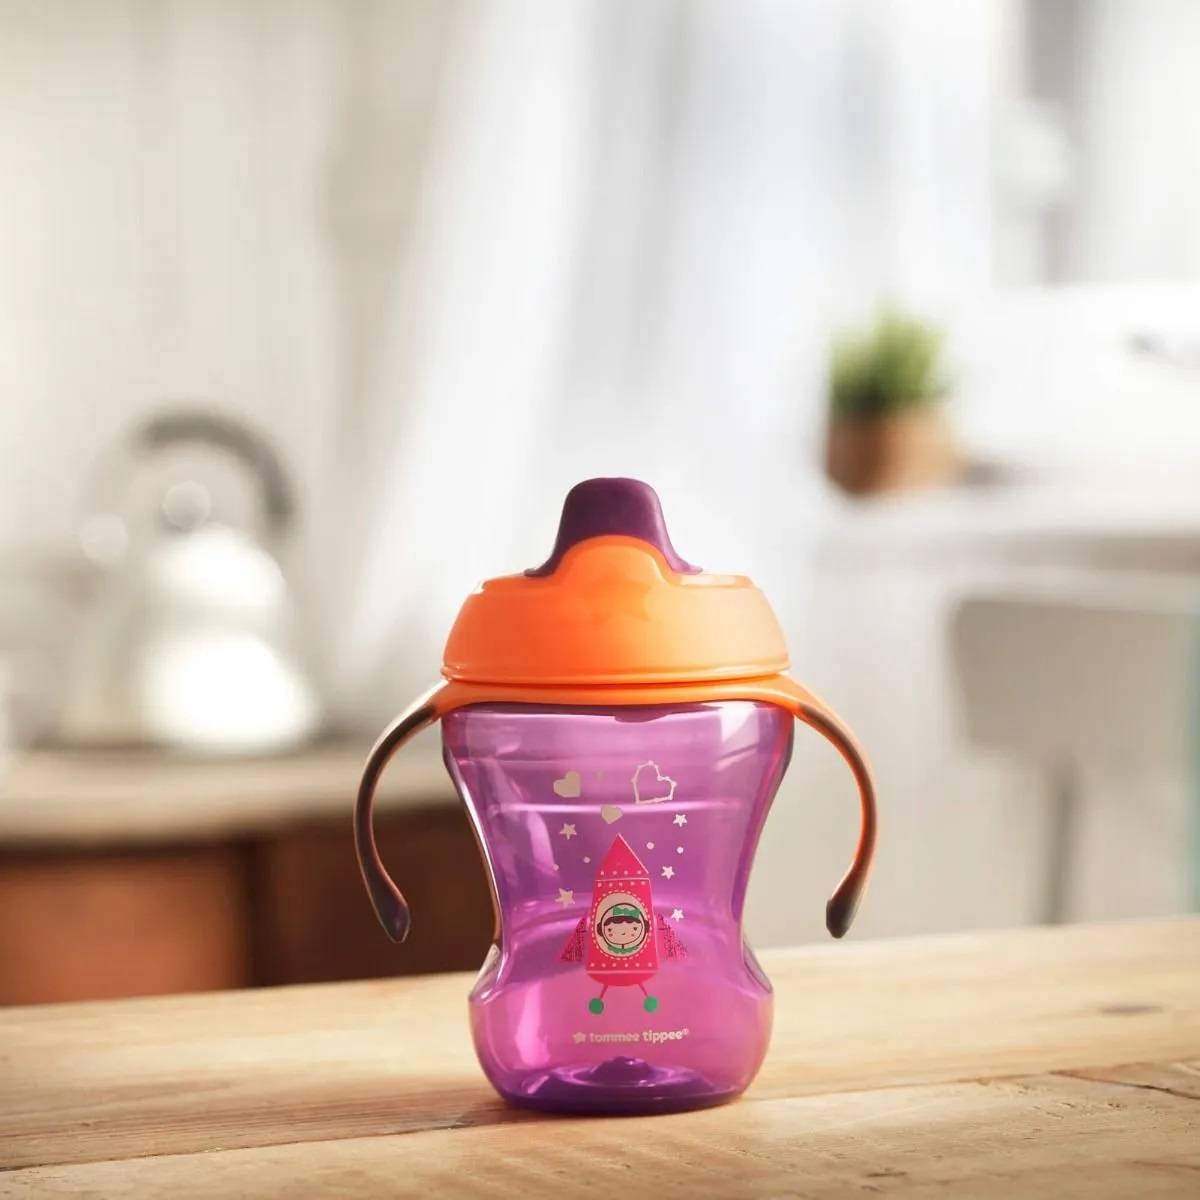 Tommee Tippee Trainer Sippee Cup 8oz (3-Pack)